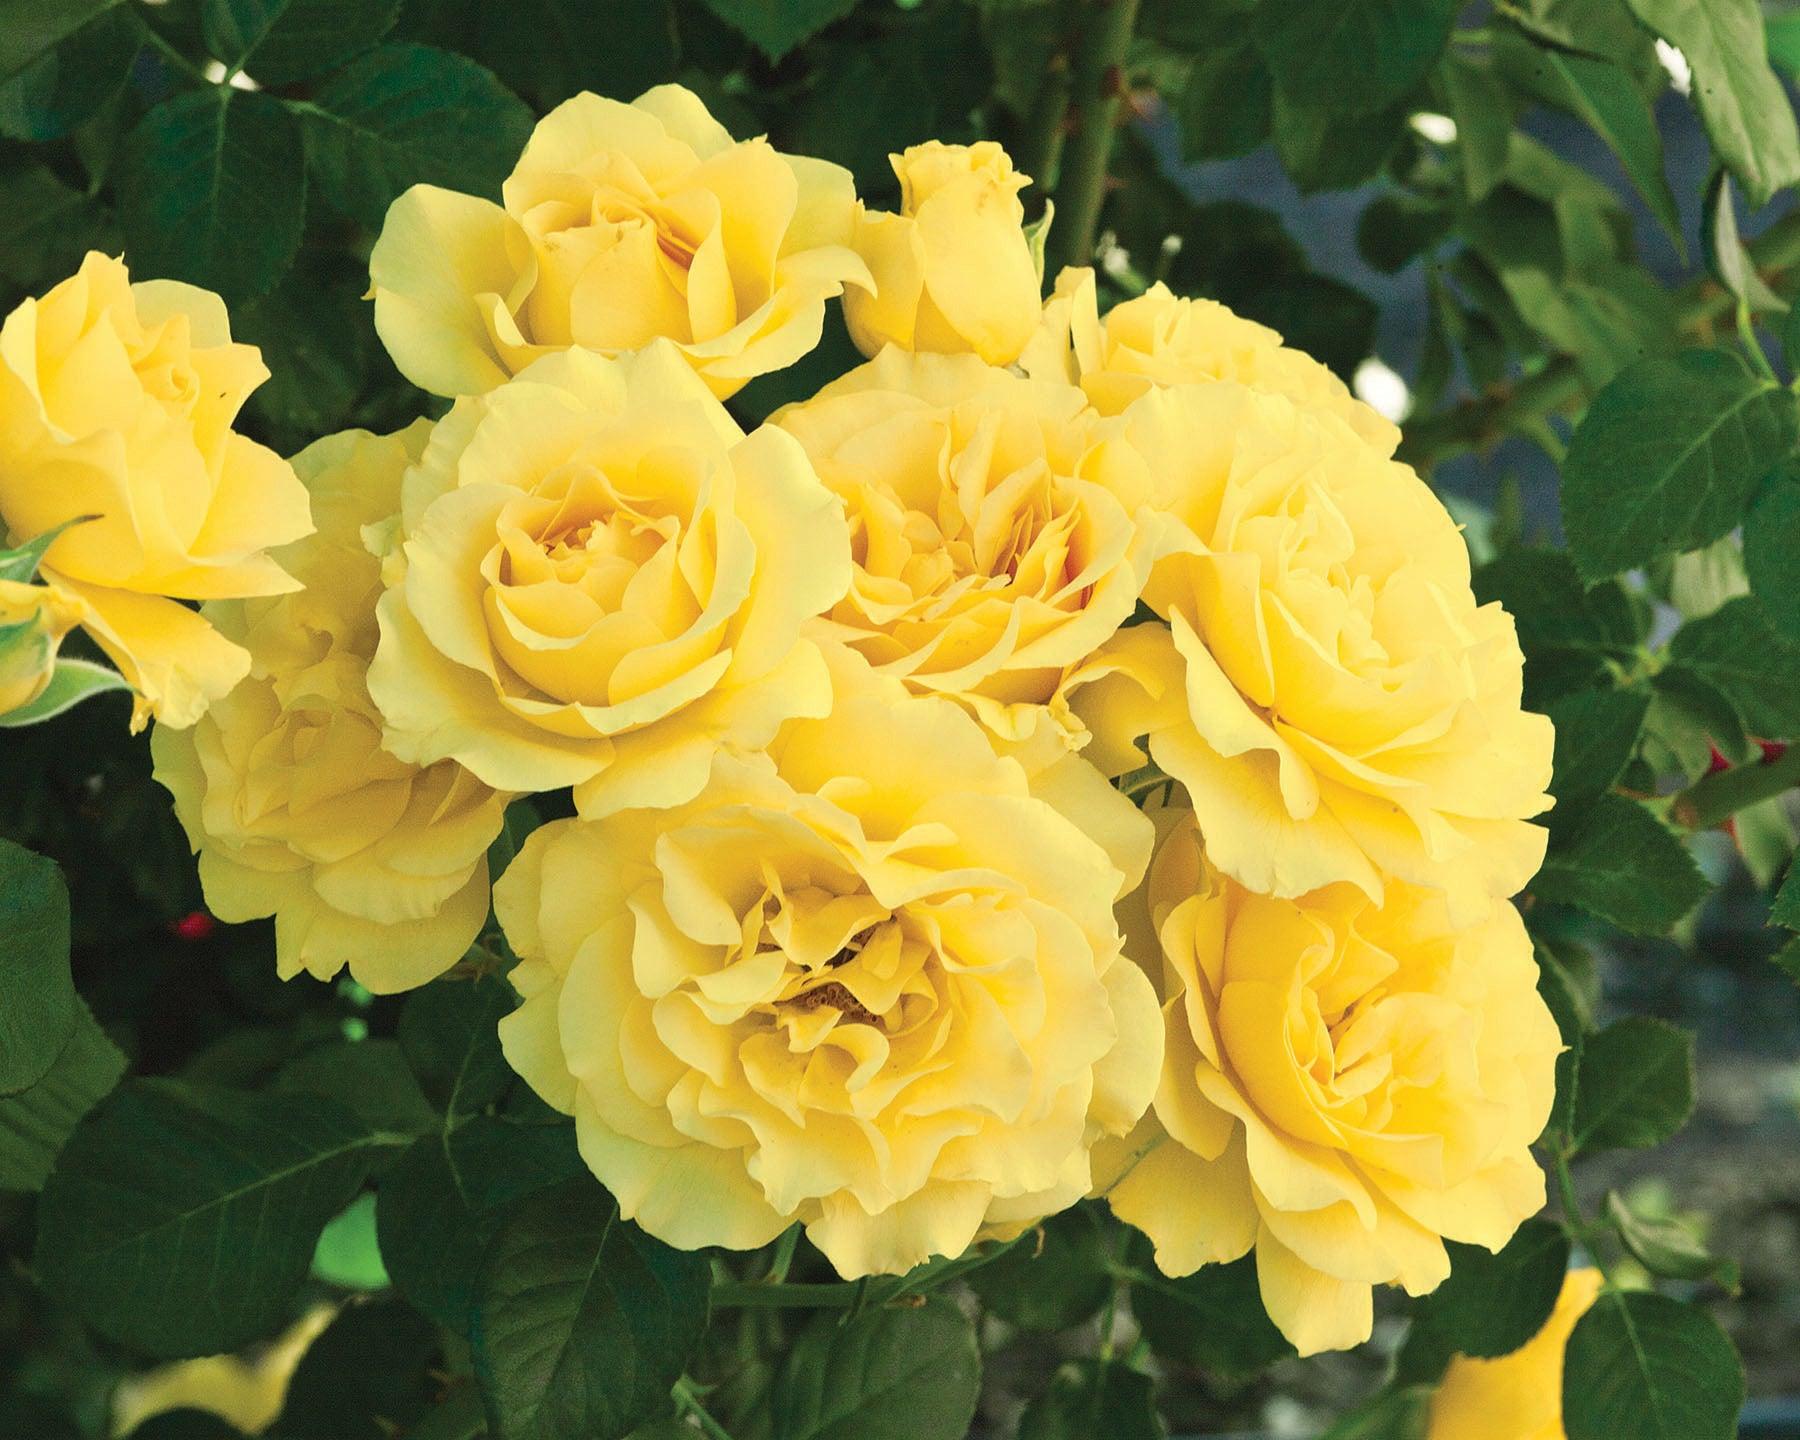 The blooms of the Sparkle & Shine Rose are a sight to behold, with their brighter and longer-lasting yellow color that exudes cheerfulness and radiance. Not only are the flowers bigger and more fragrant, but they also offer a delightful scent that adds to their allure. 